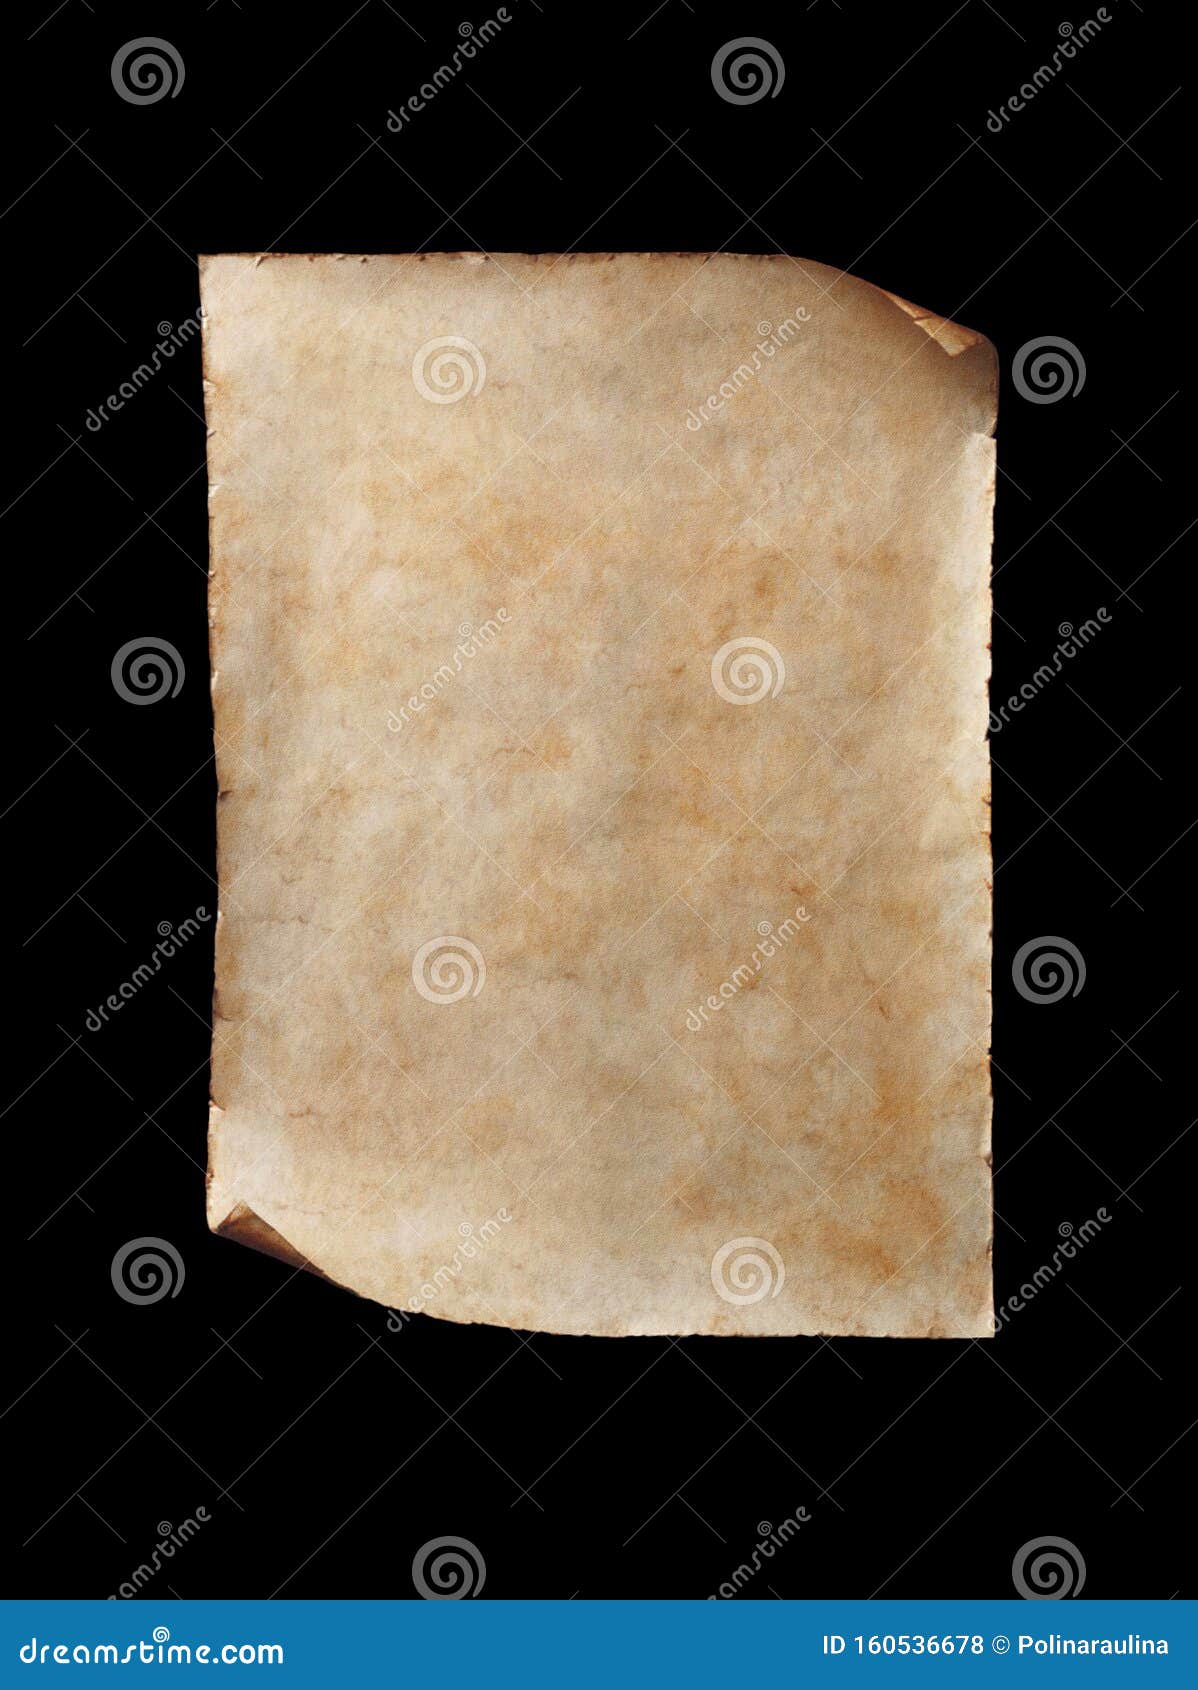 https://thumbs.dreamstime.com/z/old-parchment-aged-old-worn-out-yellow-brown-parchment-paper-background-texture-ancient-antique-rustic-grungy-retro-manuscript-160536678.jpg